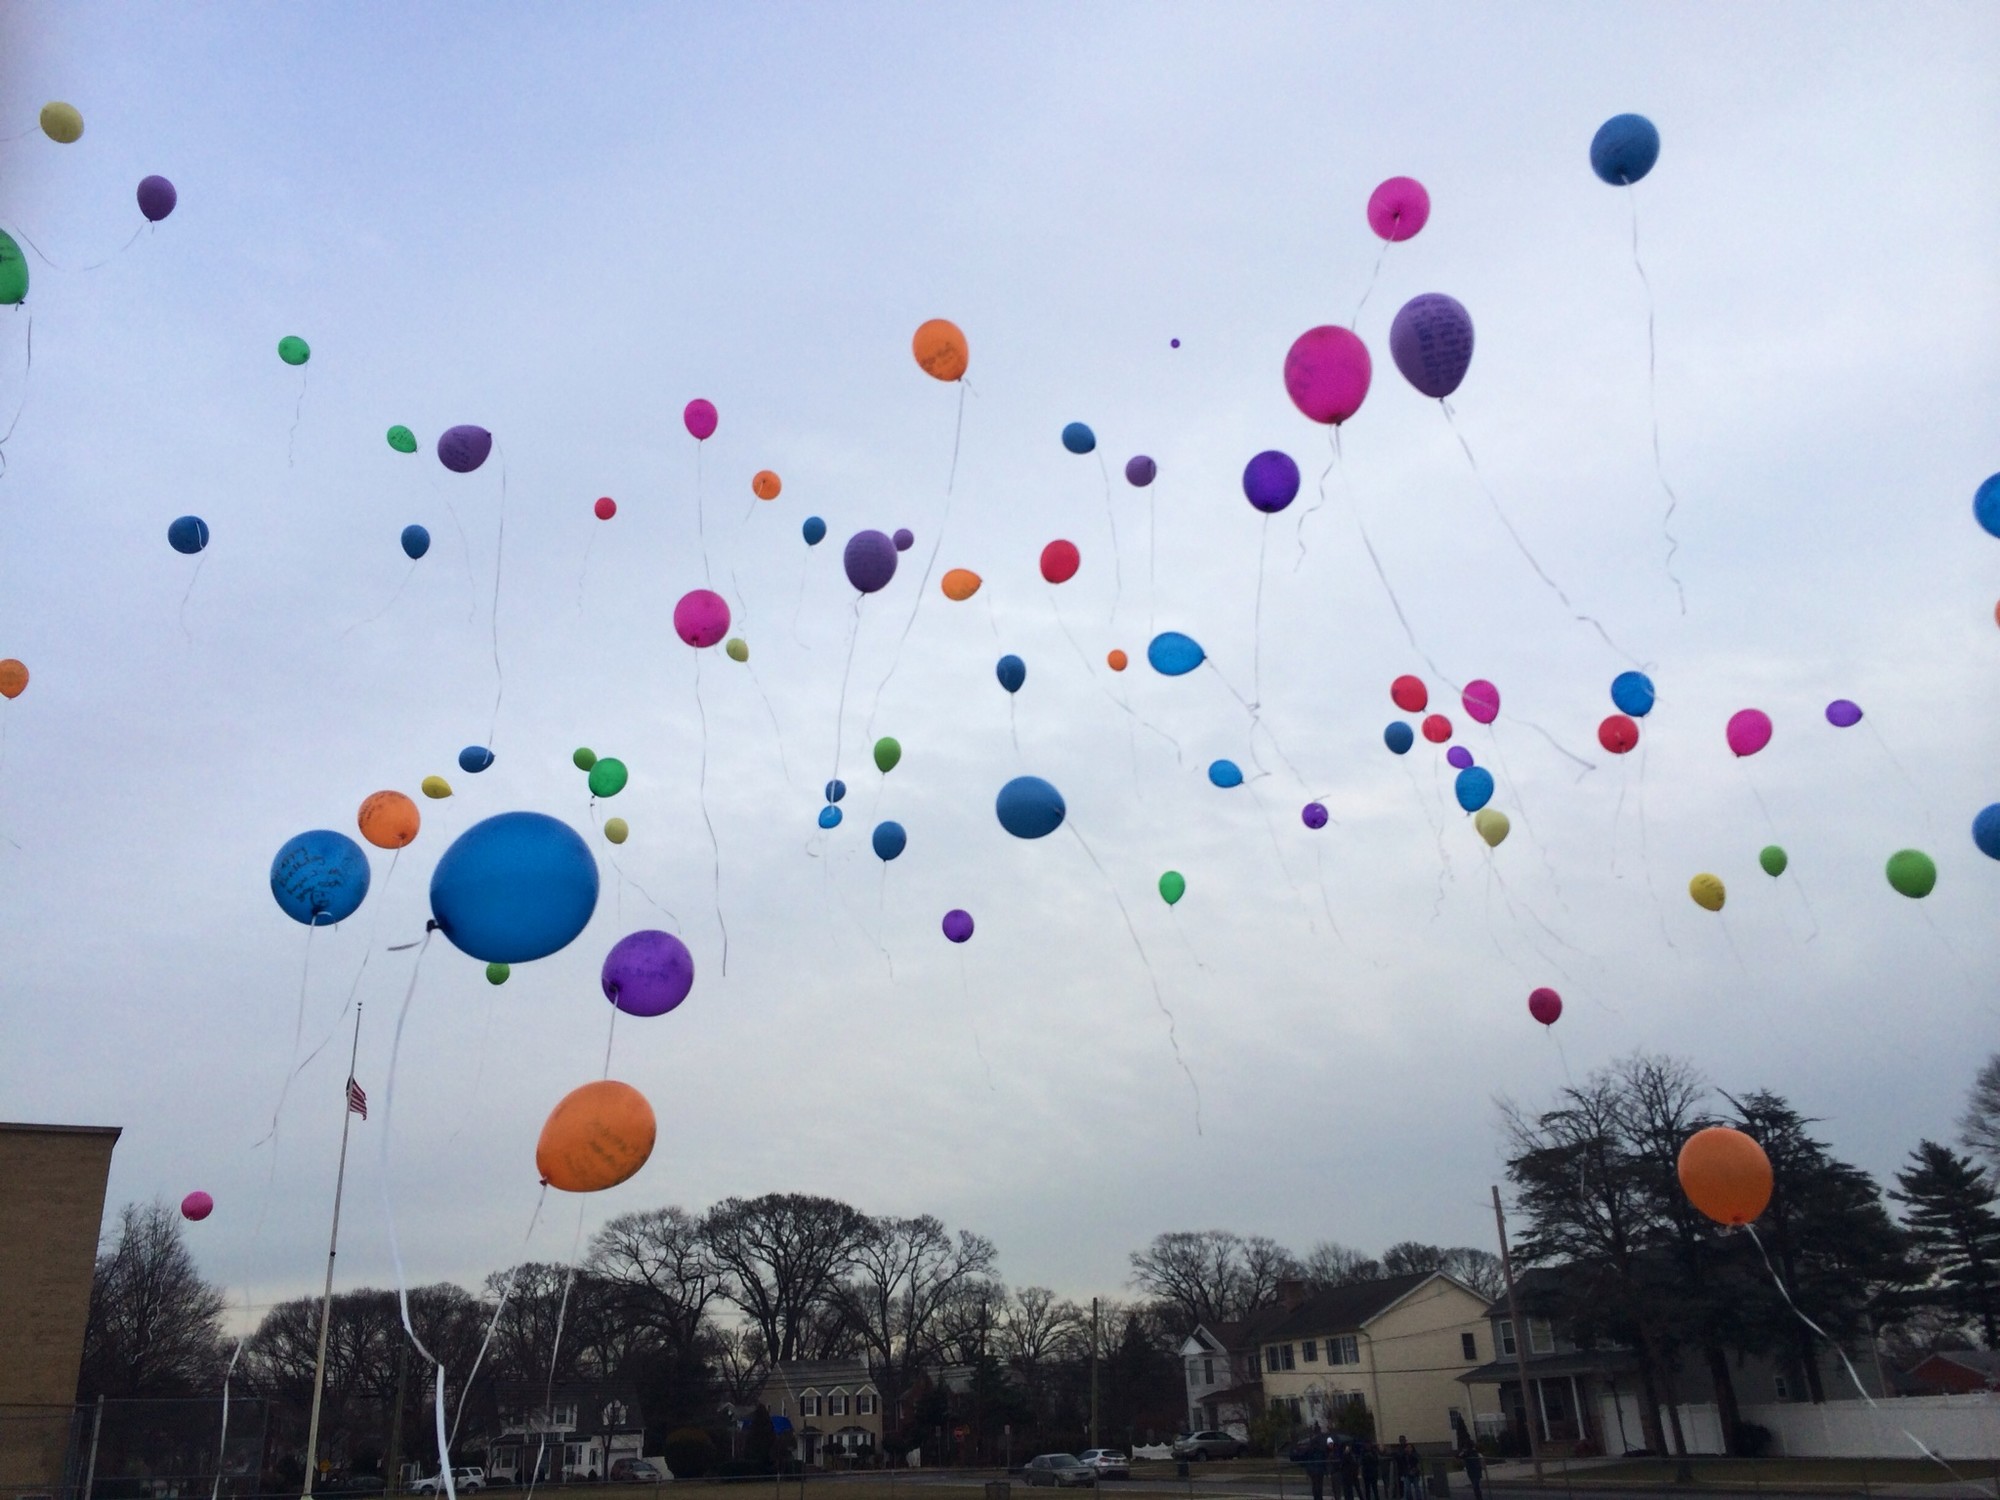 Balloons with messages written on them for Zachary were released following the ceremony.